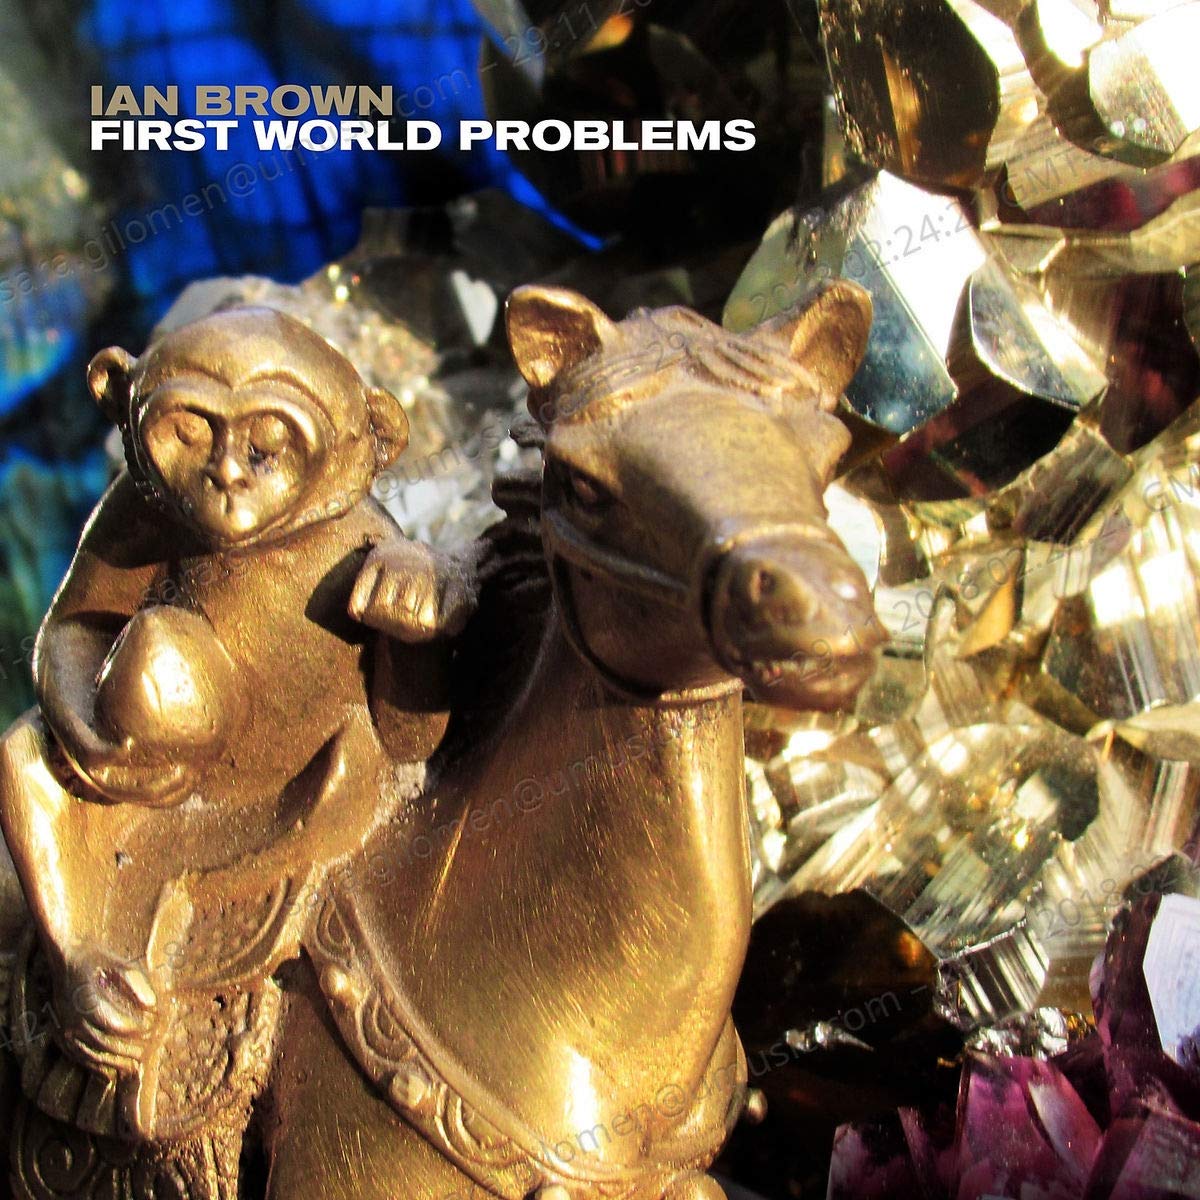 Ian Brown - First World Problems vinyl cover